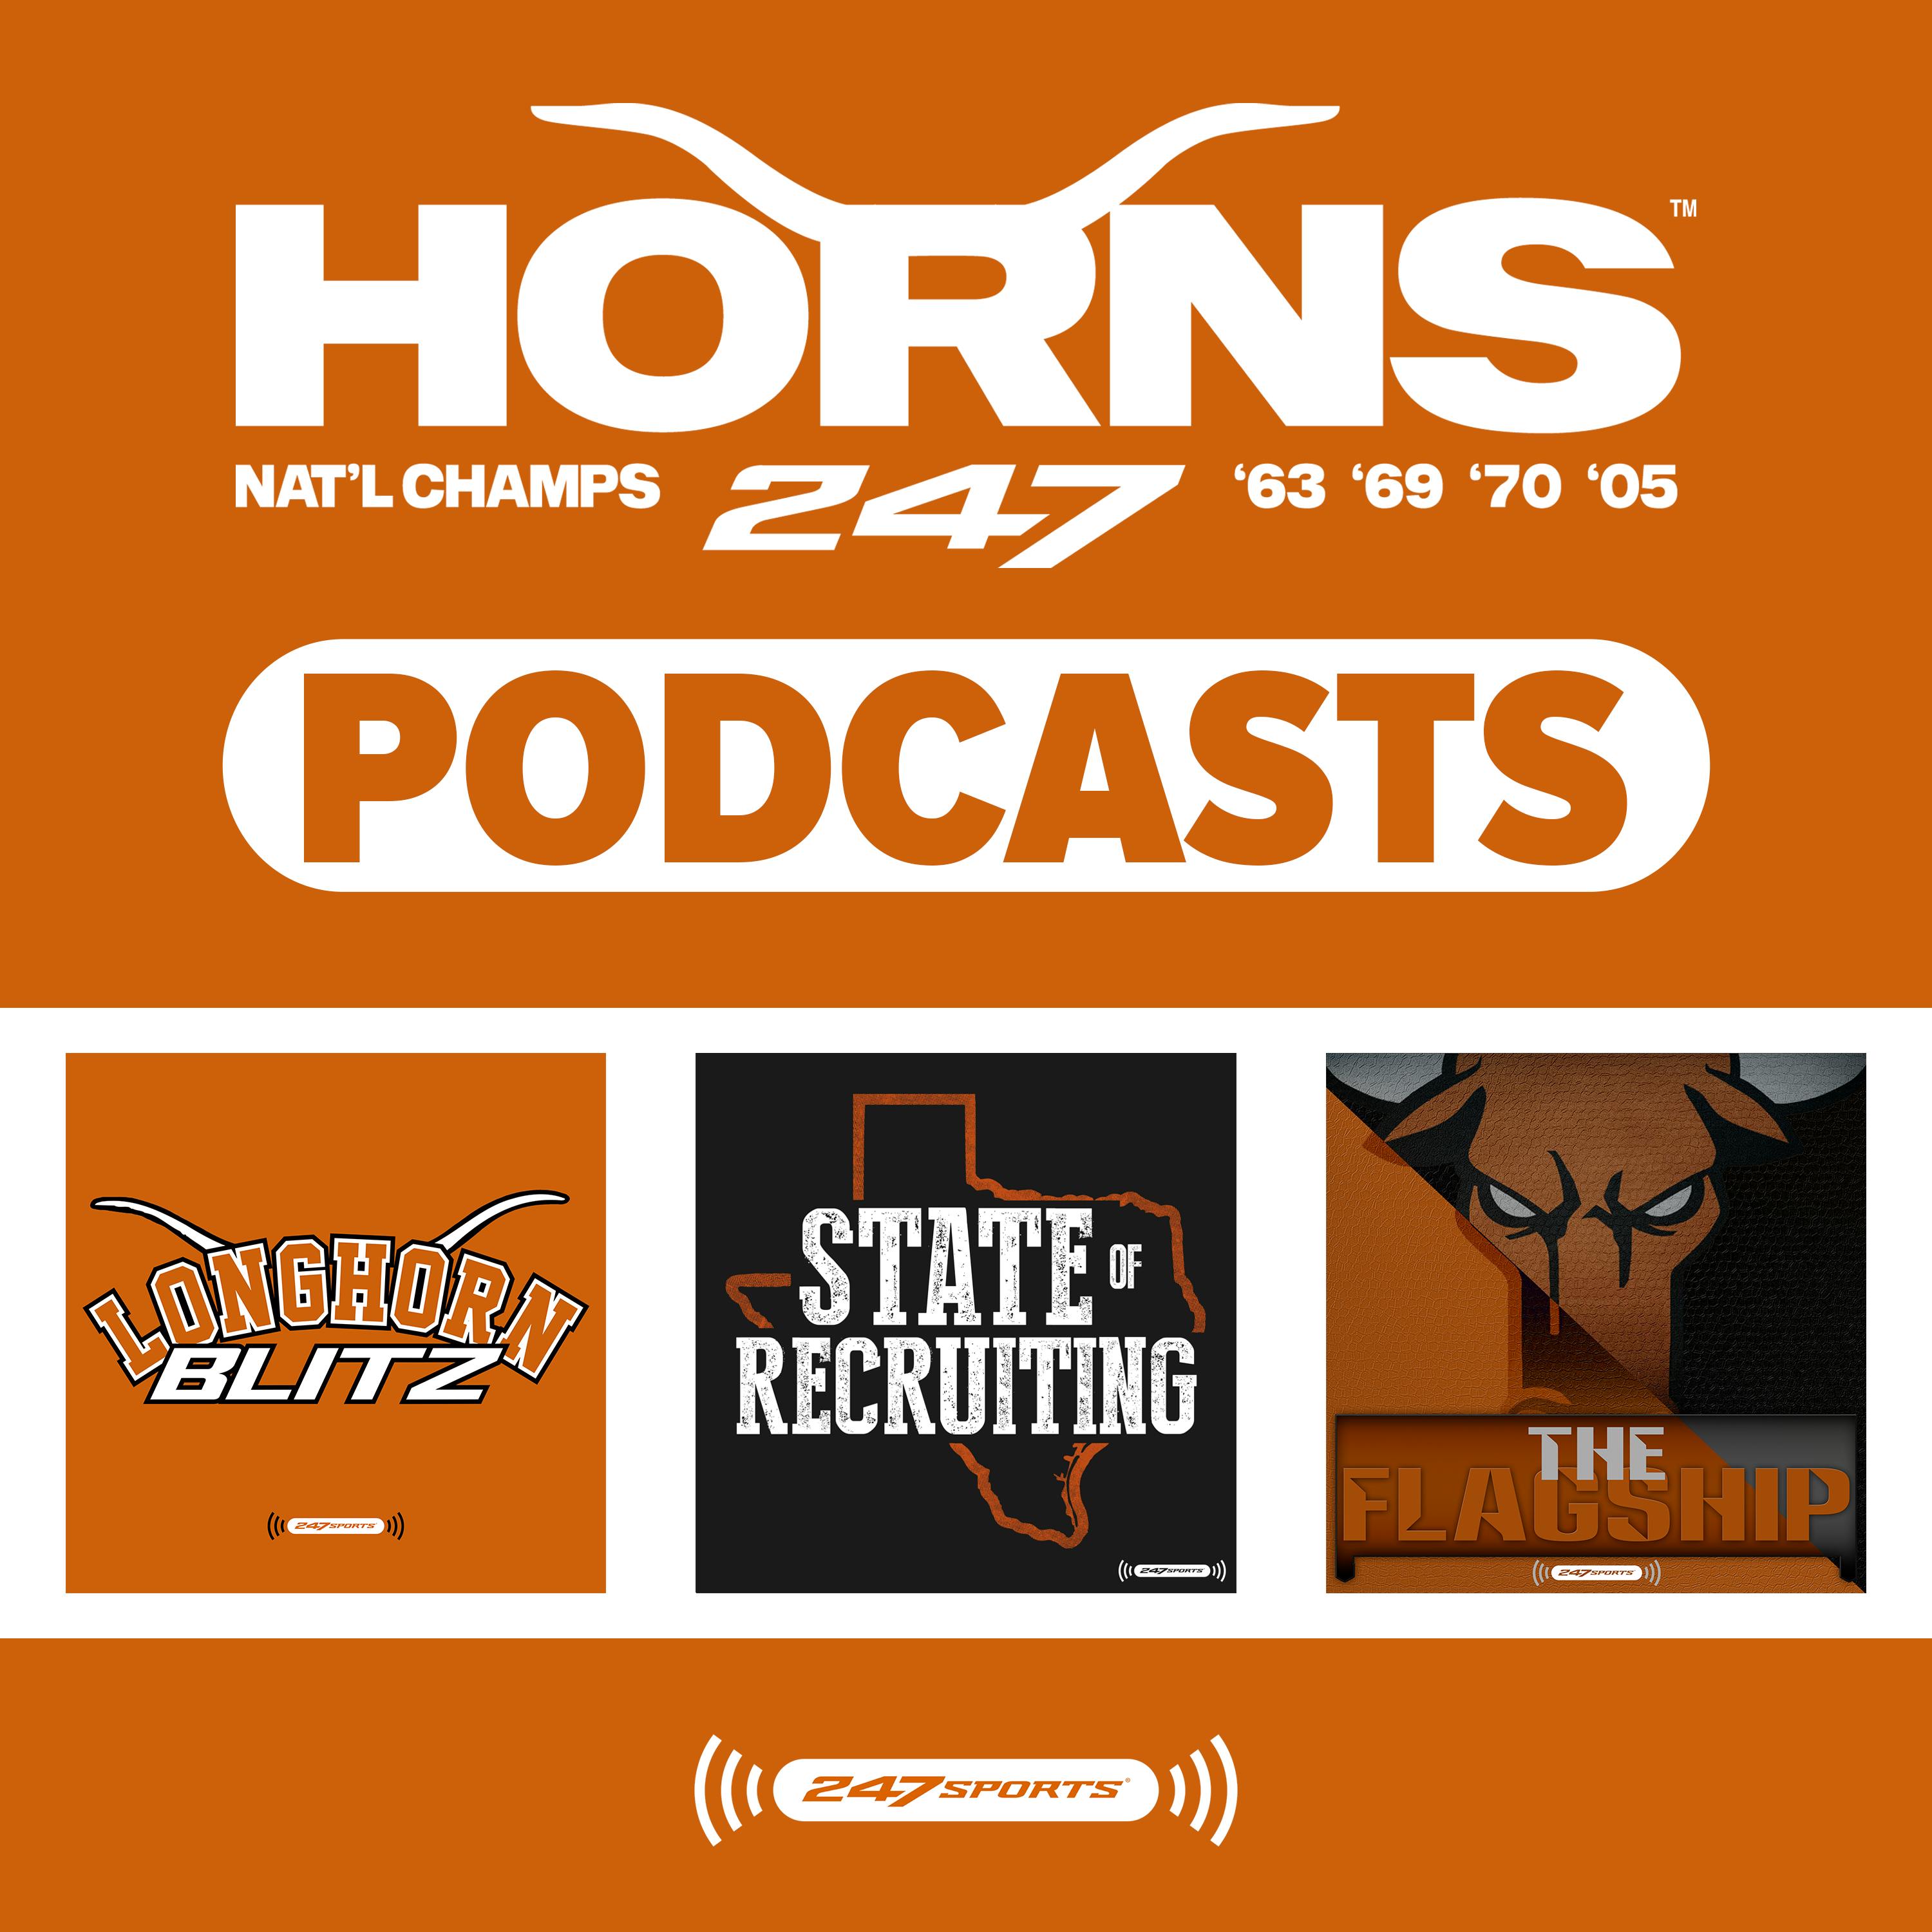 Horns247 Podcasts: Longhorn Blitz, The Flagship and State of Recruiting podcast show image